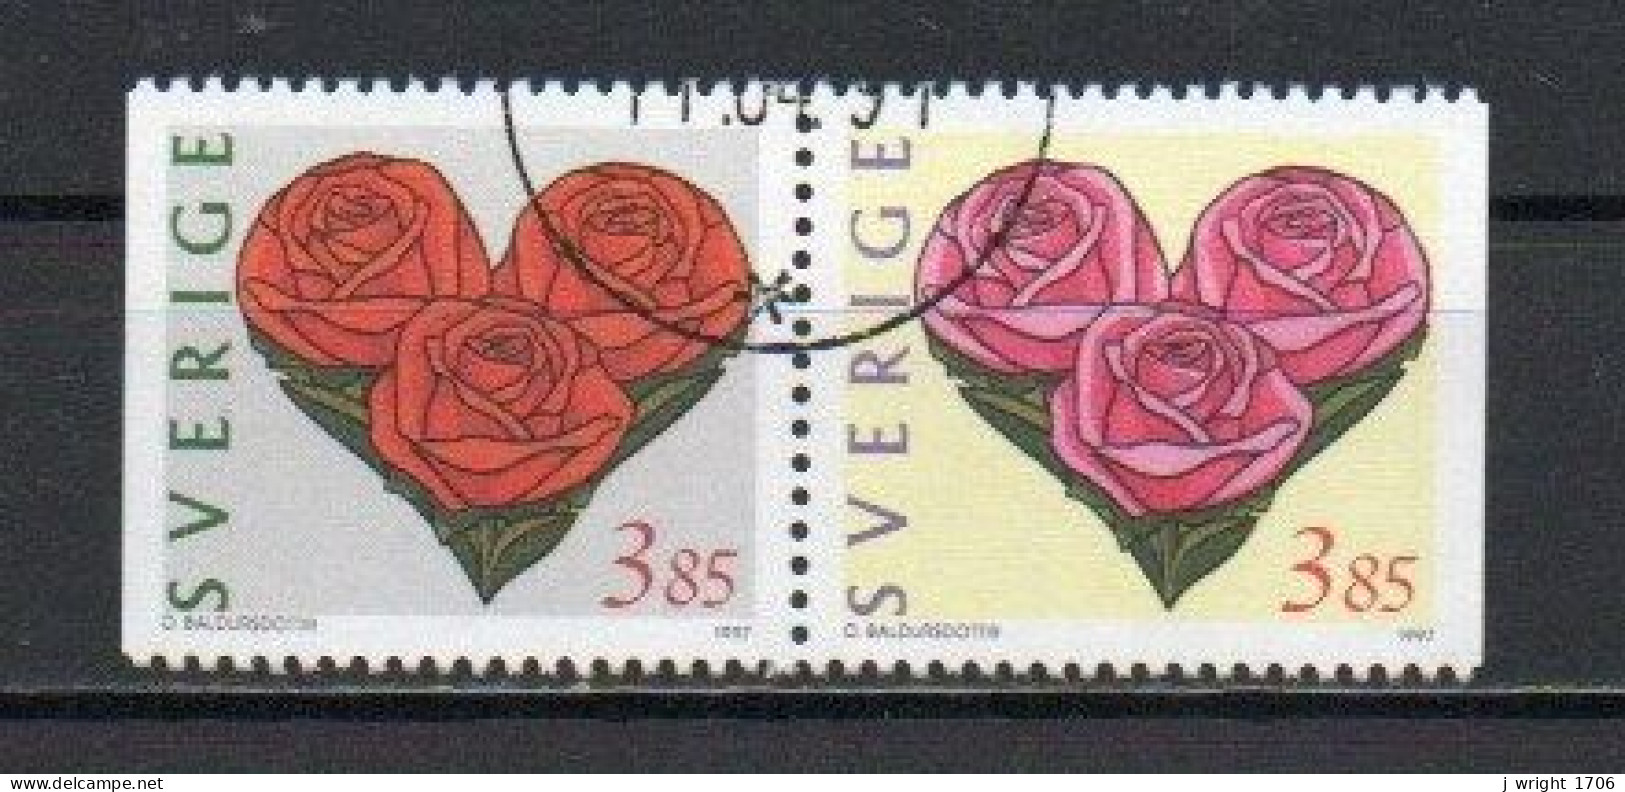 Sweden, 1997, Greetings Stamps, Set/Joined Pair, USED - Used Stamps